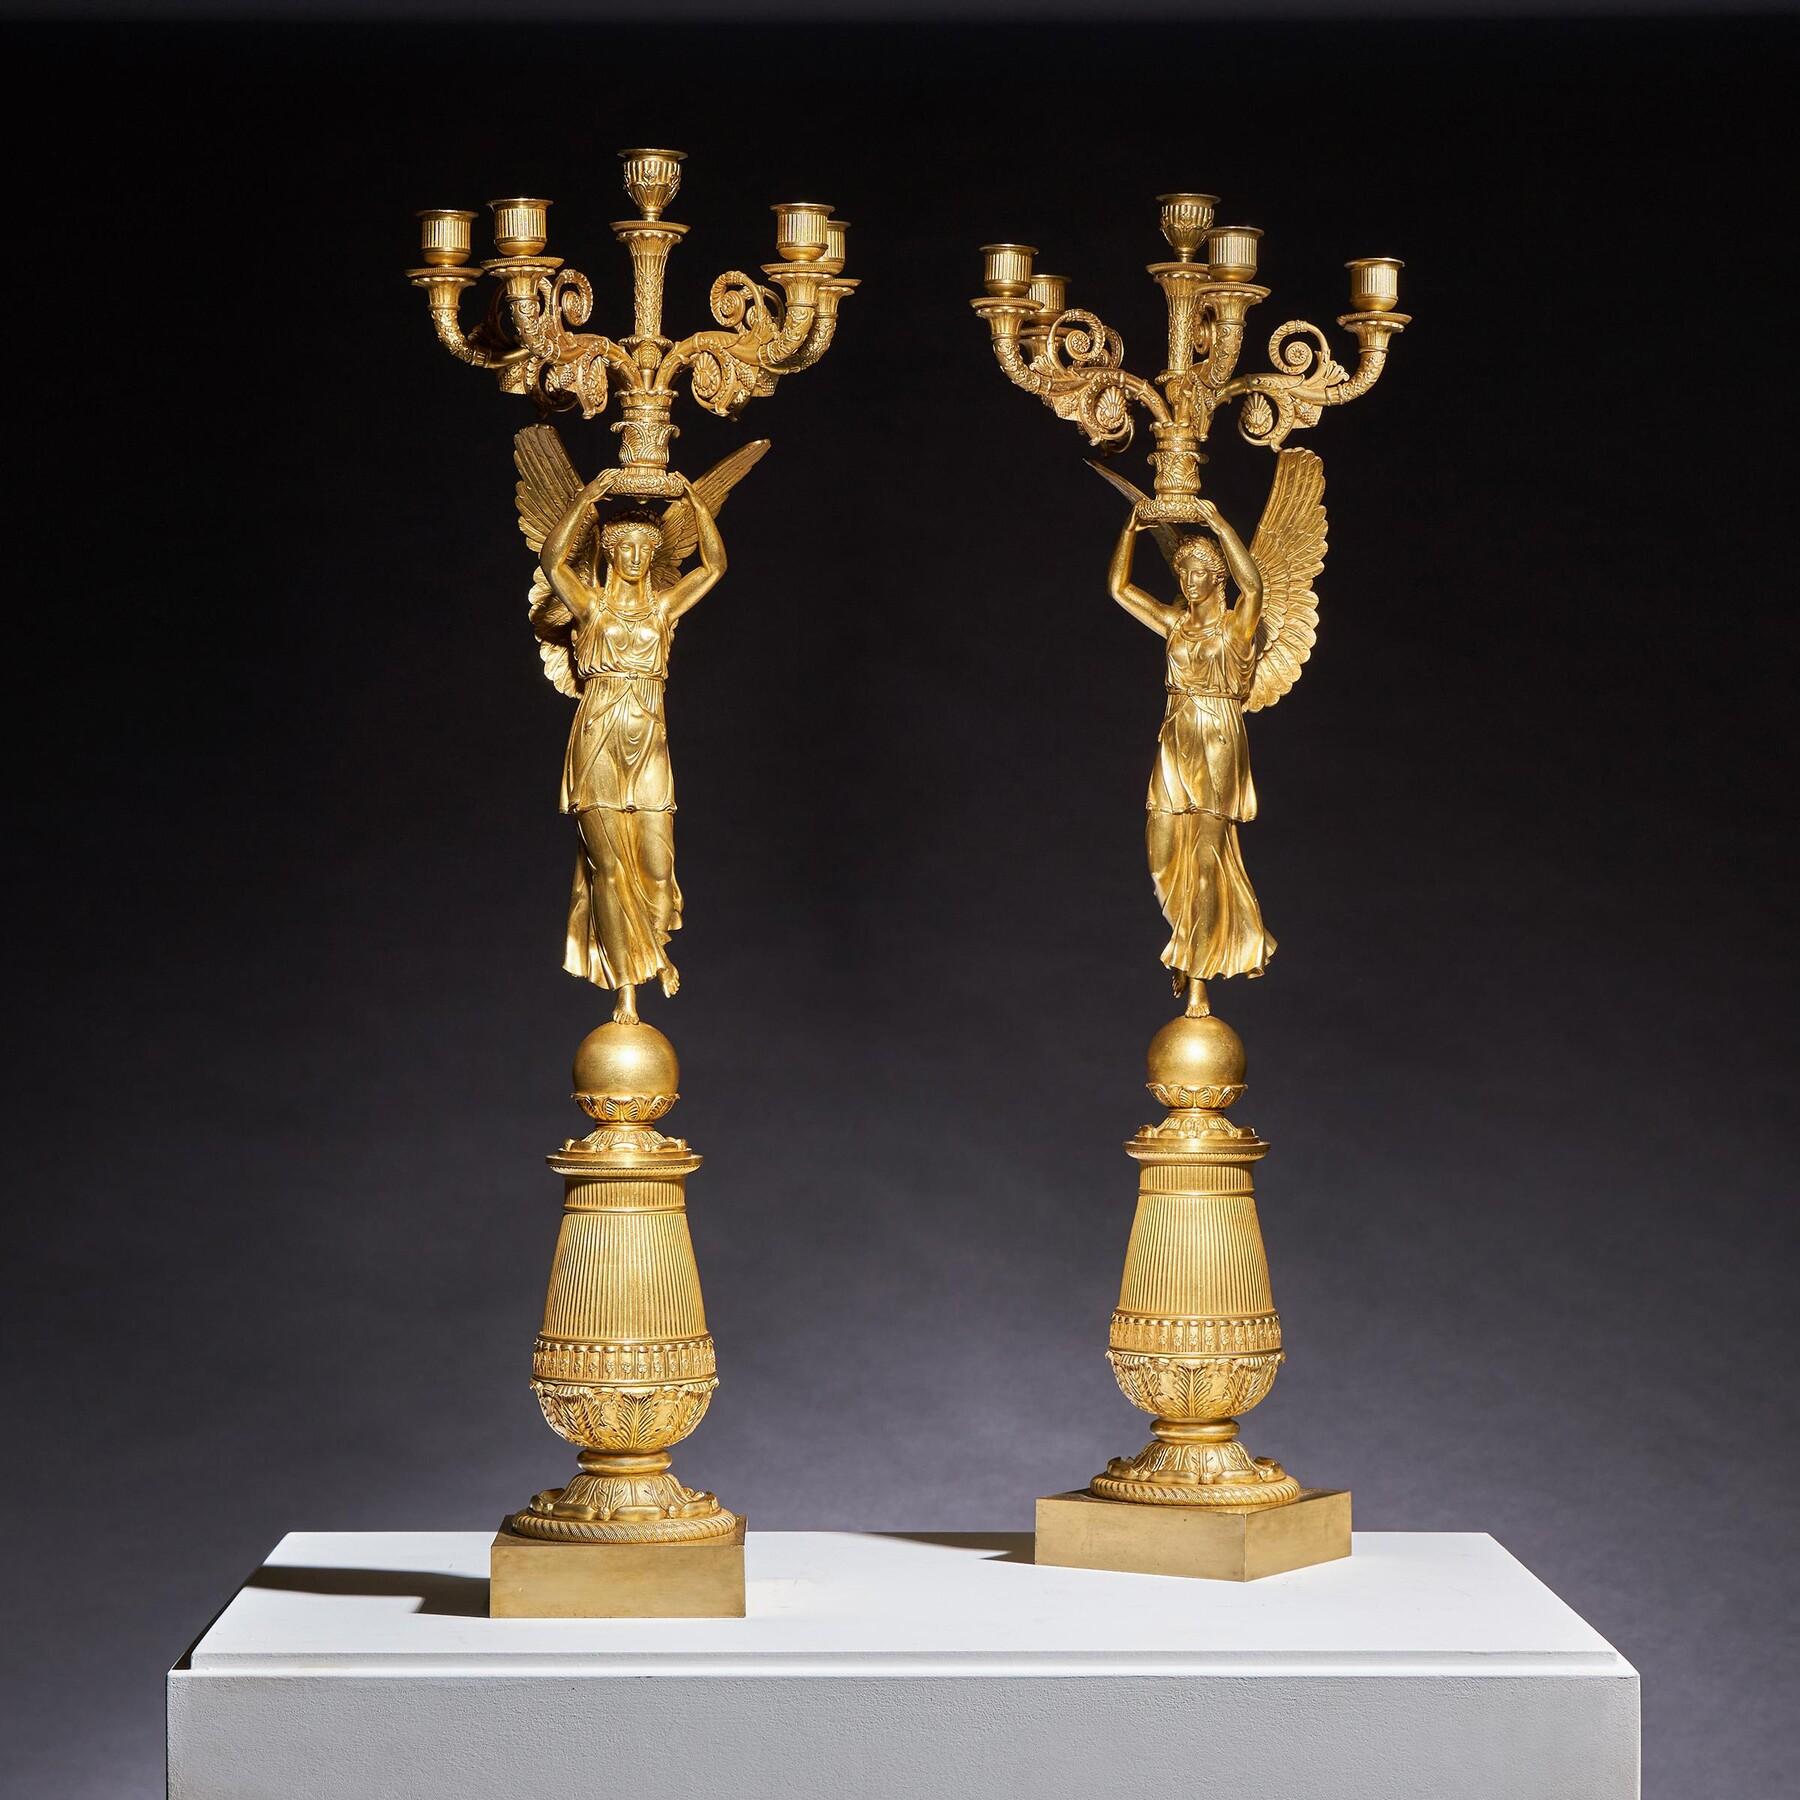 Exceptional Pair of French Late Empire Gilt-bronze Candelabra Attributed to Pier In Good Condition For Sale In Benington, Herts